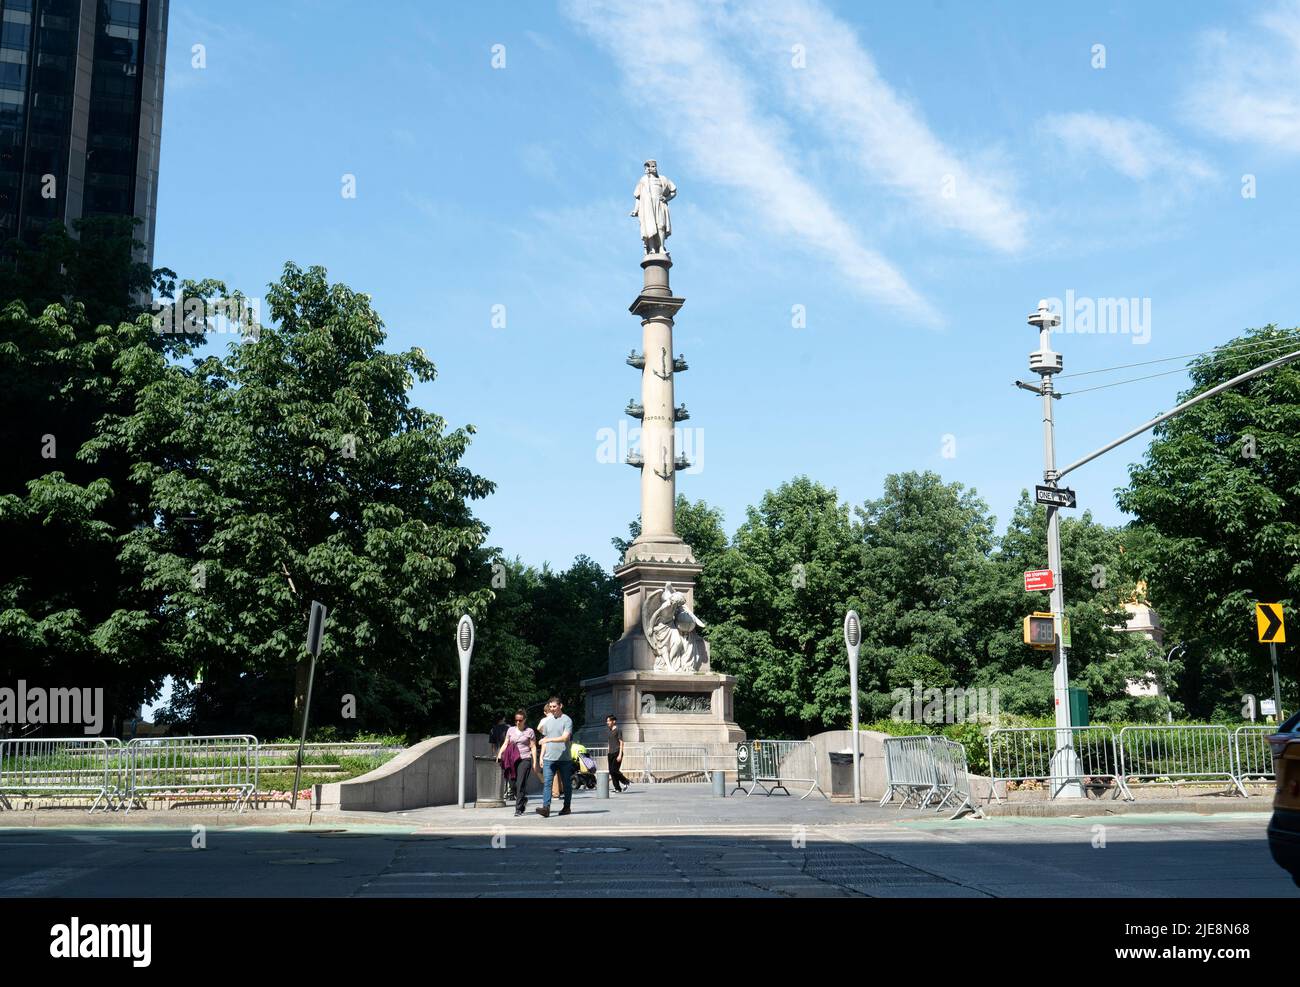 The Columbus Monument consists of a 14-foot-tall statue atop a column installed at the center of Manhattan's Columbus Circle in New York City. Stock Photo